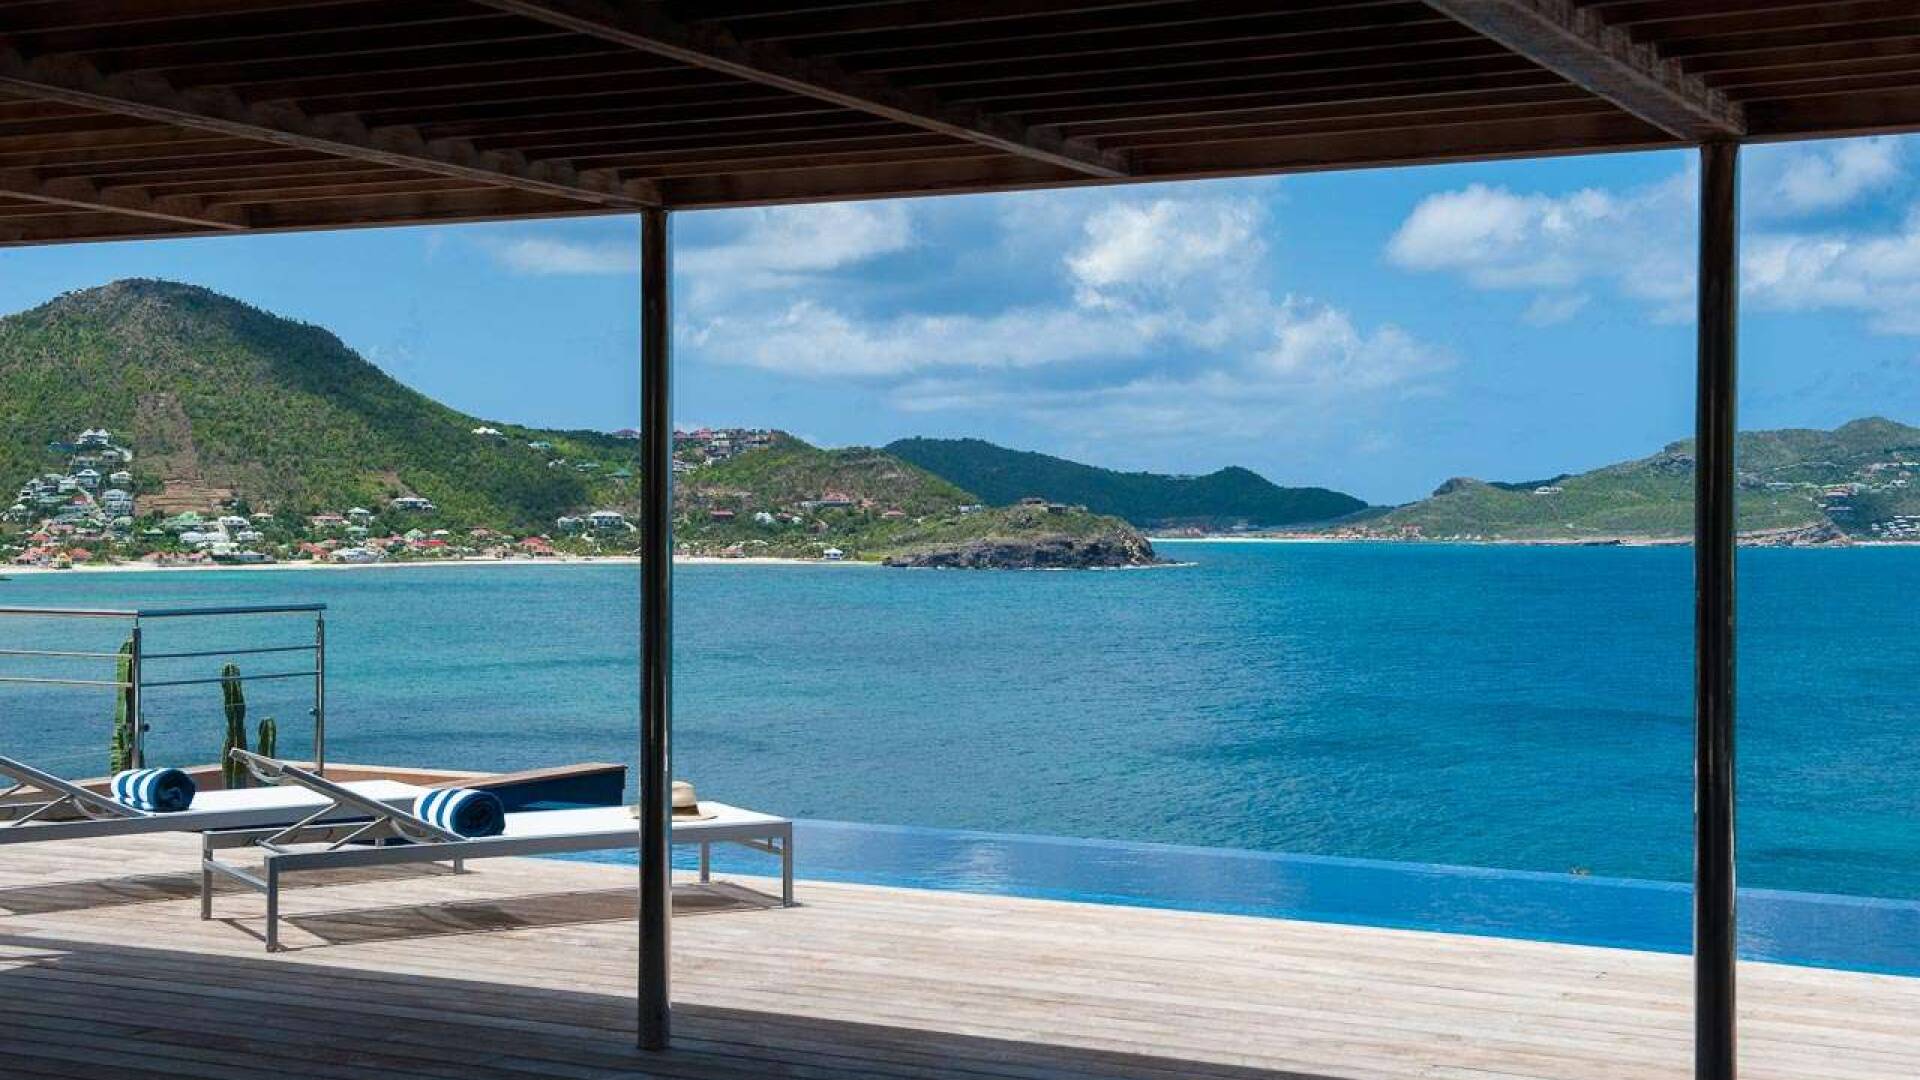 Terrace at WV VPM, Pointe Milou, St. Barthelemy